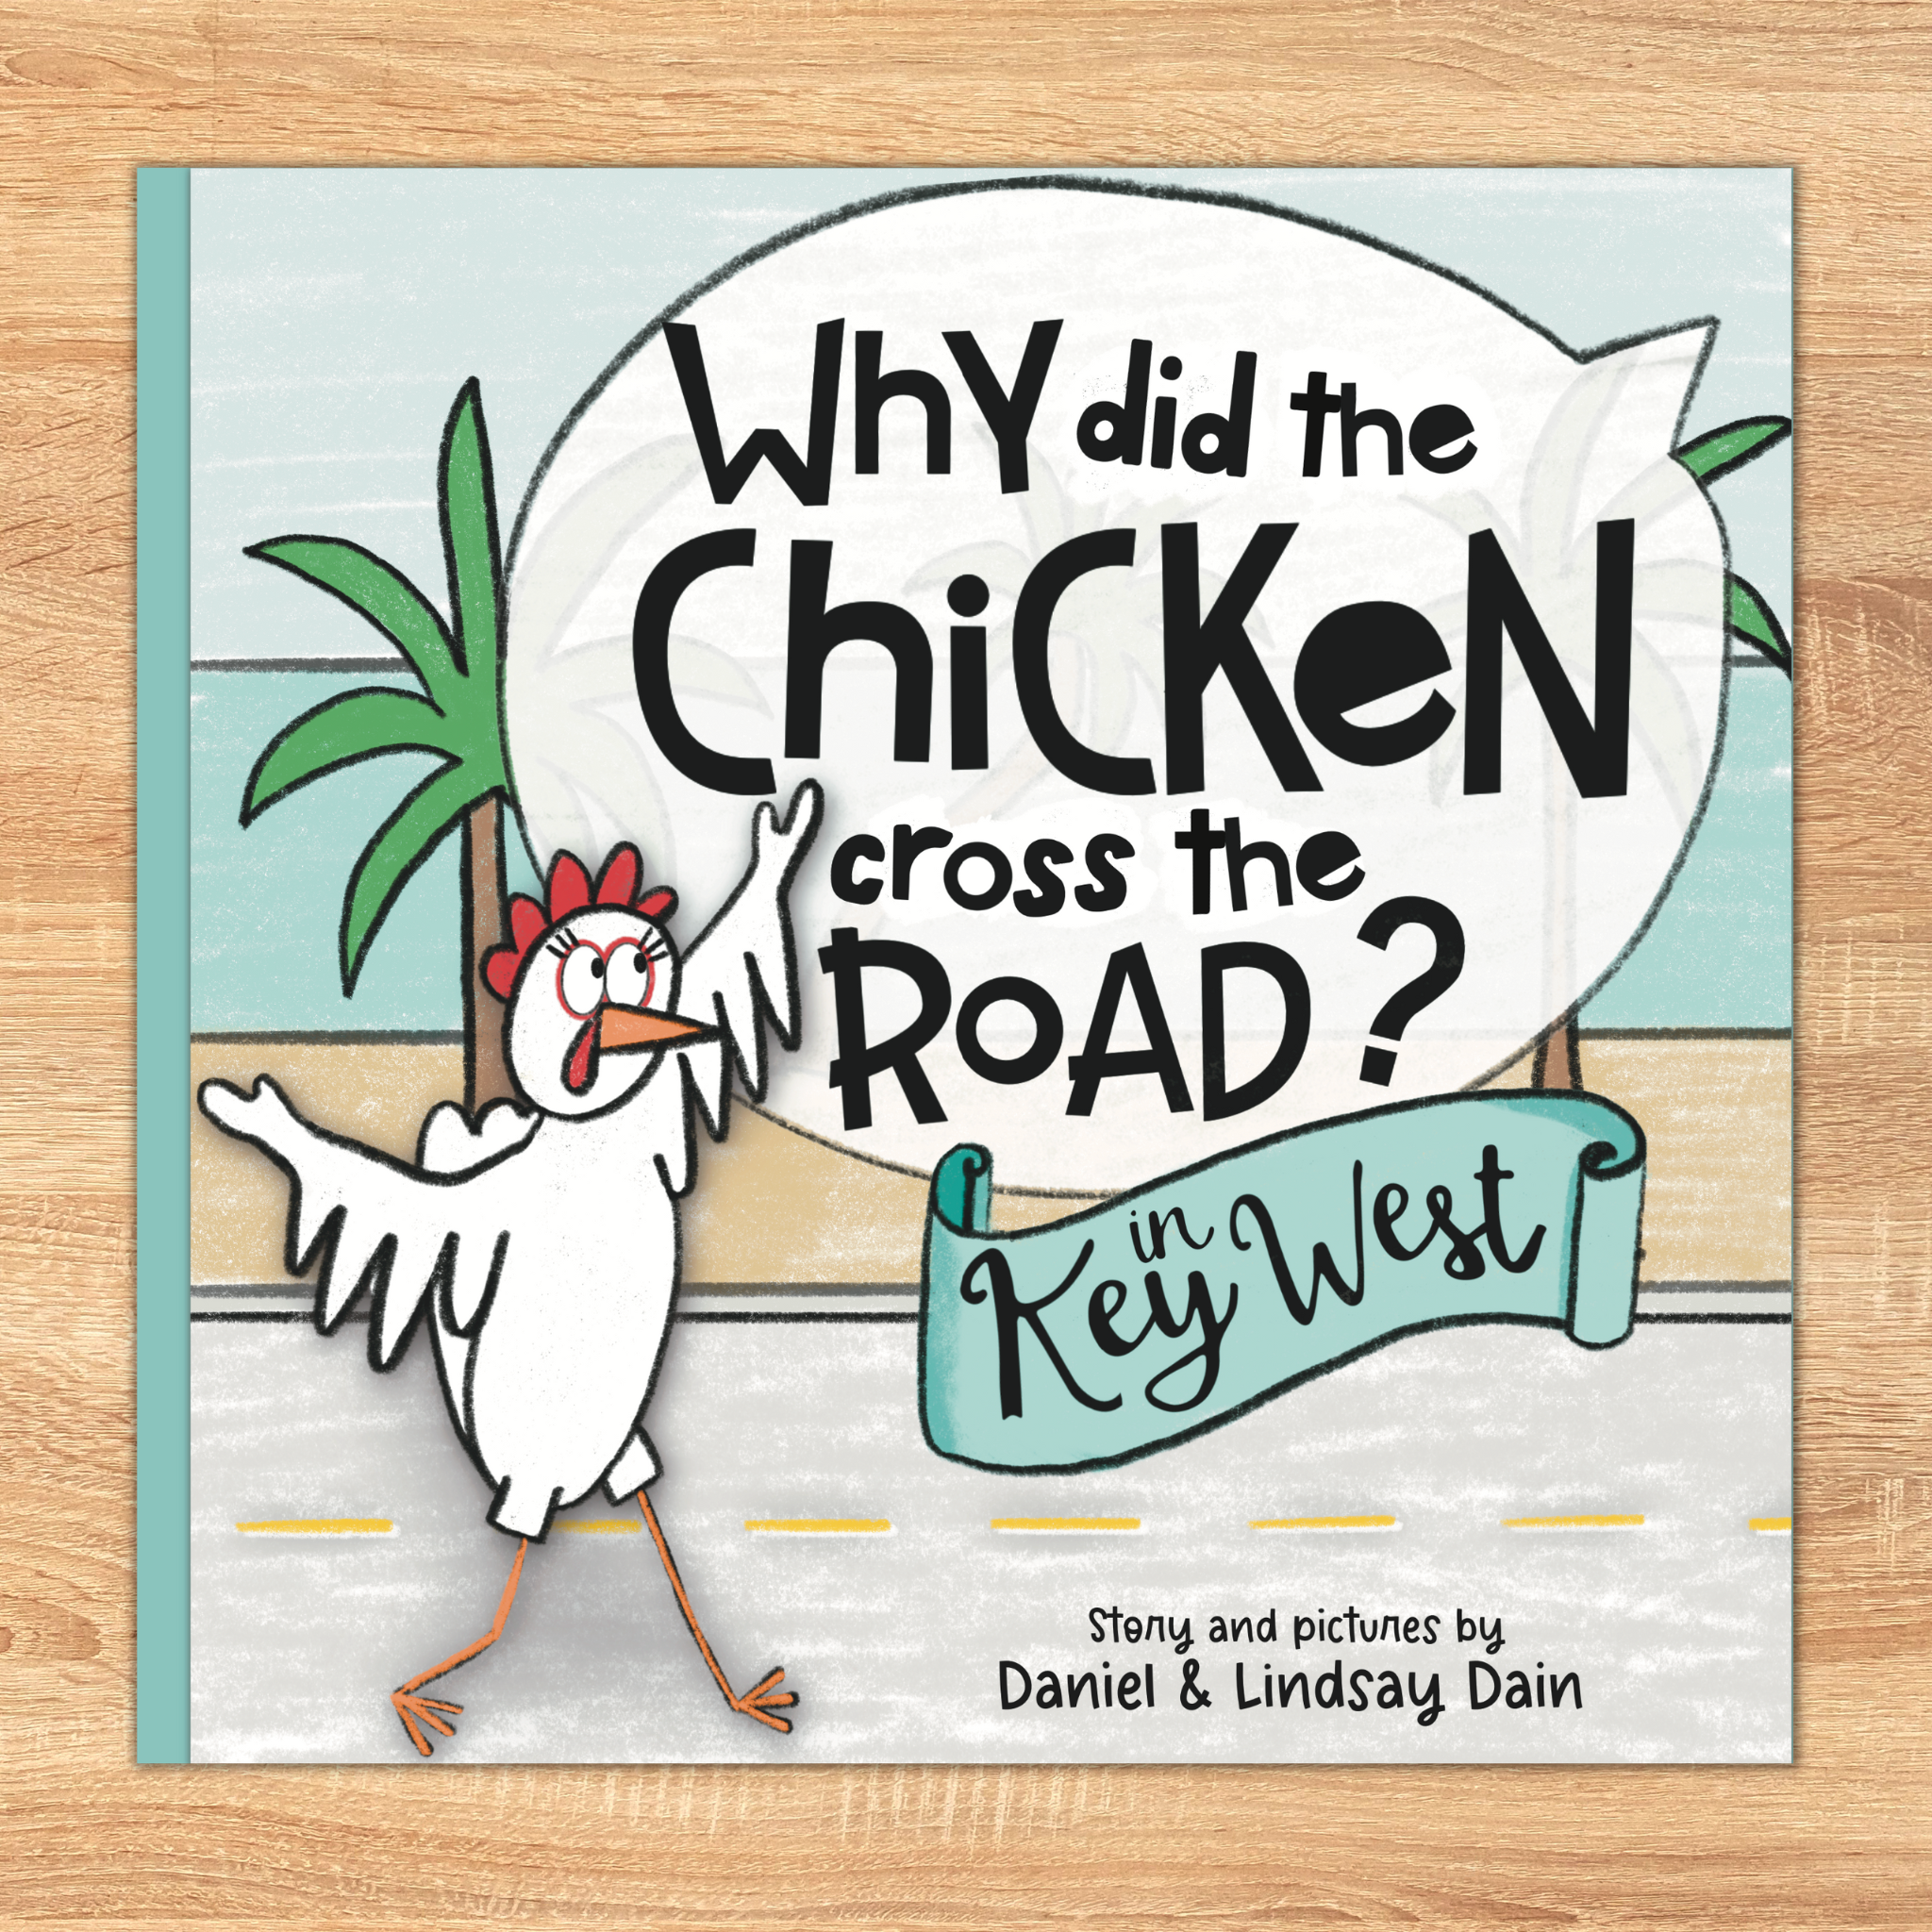 front cover image of the book "Why Did the Chicken Cross the Road in Key West?" self published through Amazon KDP and Kindle Direct Publishing